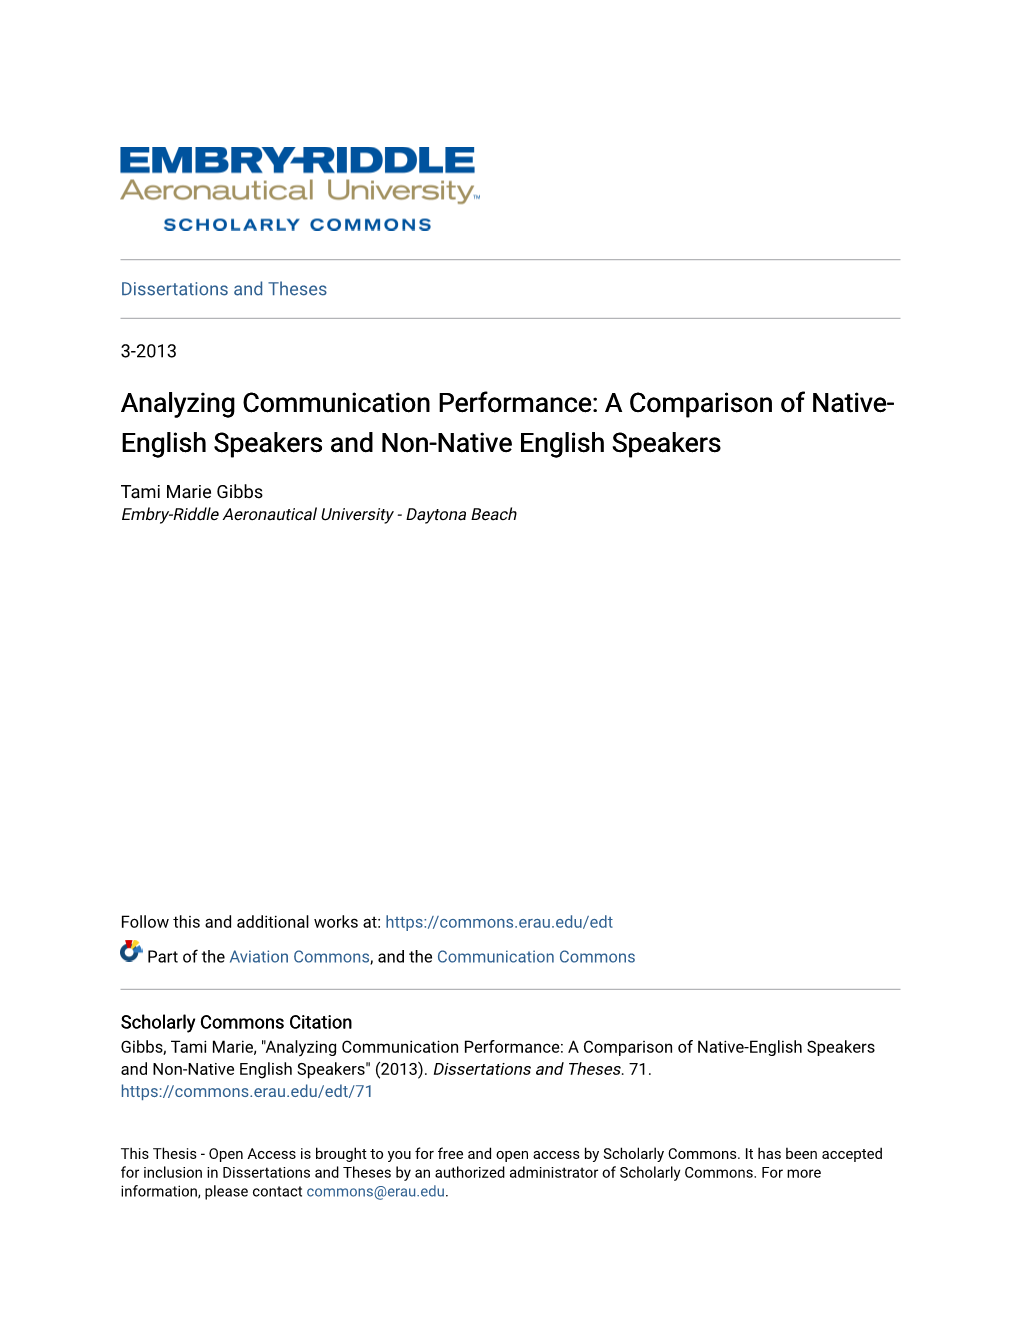 A Comparison of Native-English Speakers and Non-Native English Speakers" (2013)